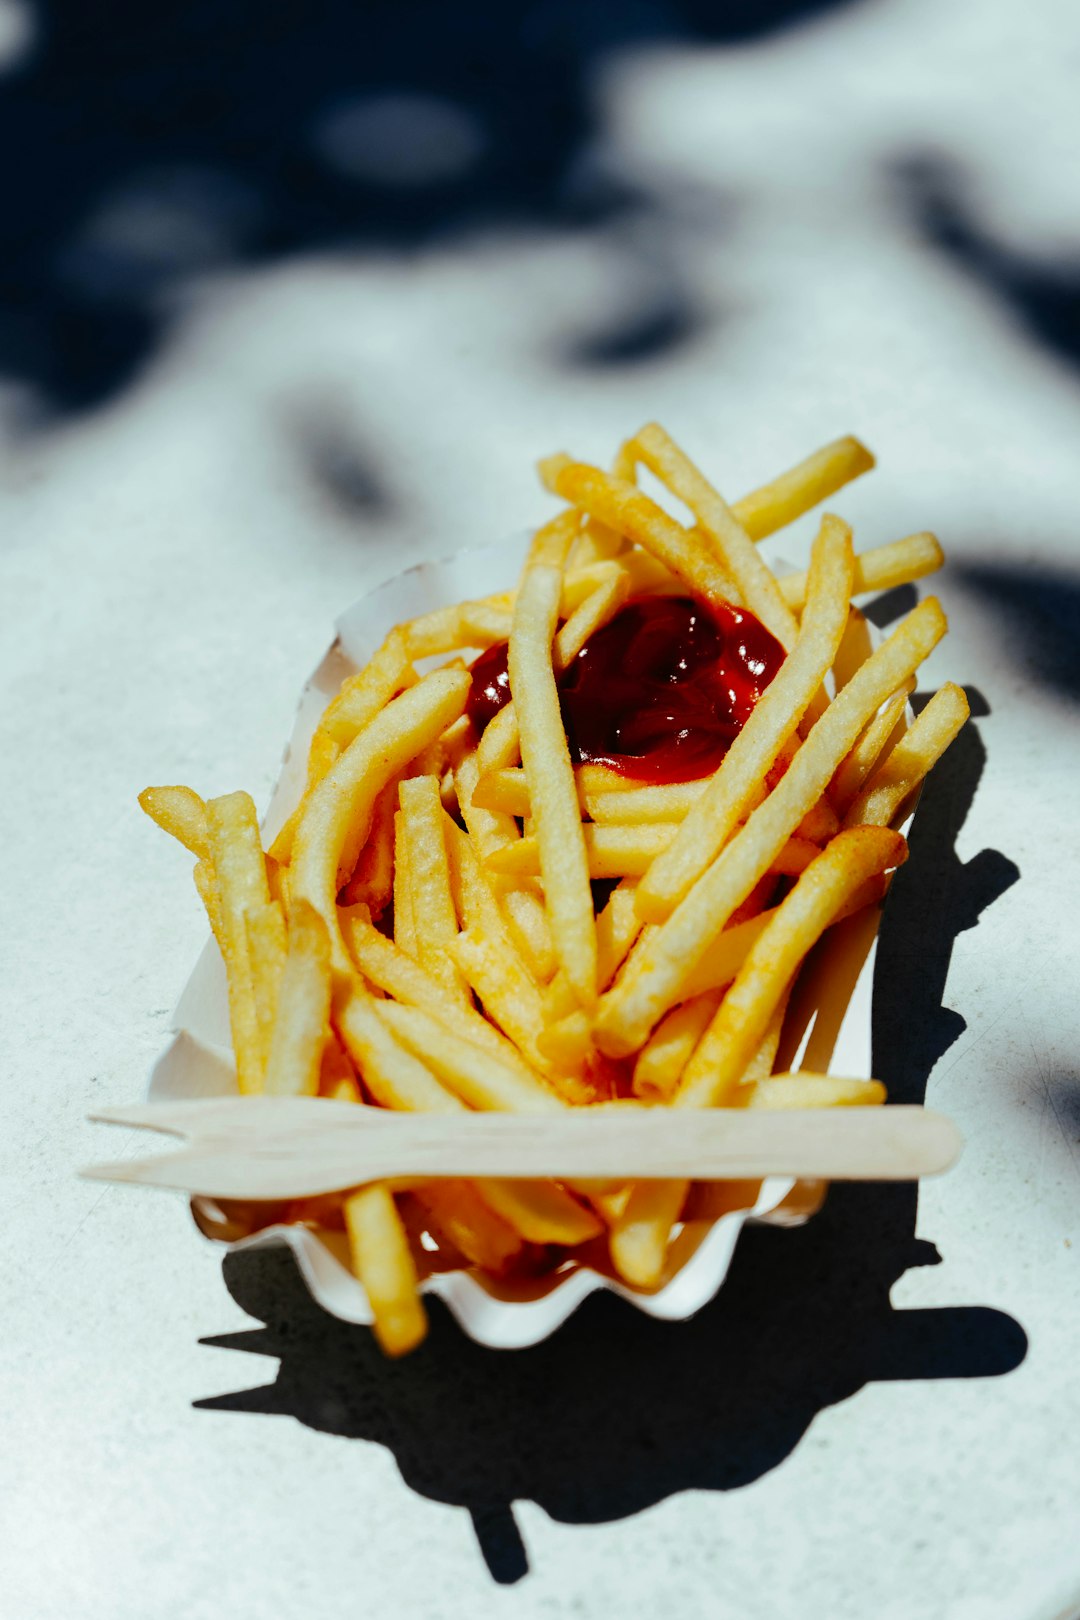 Crispy fries with ketchup, enjoyed at the zoo